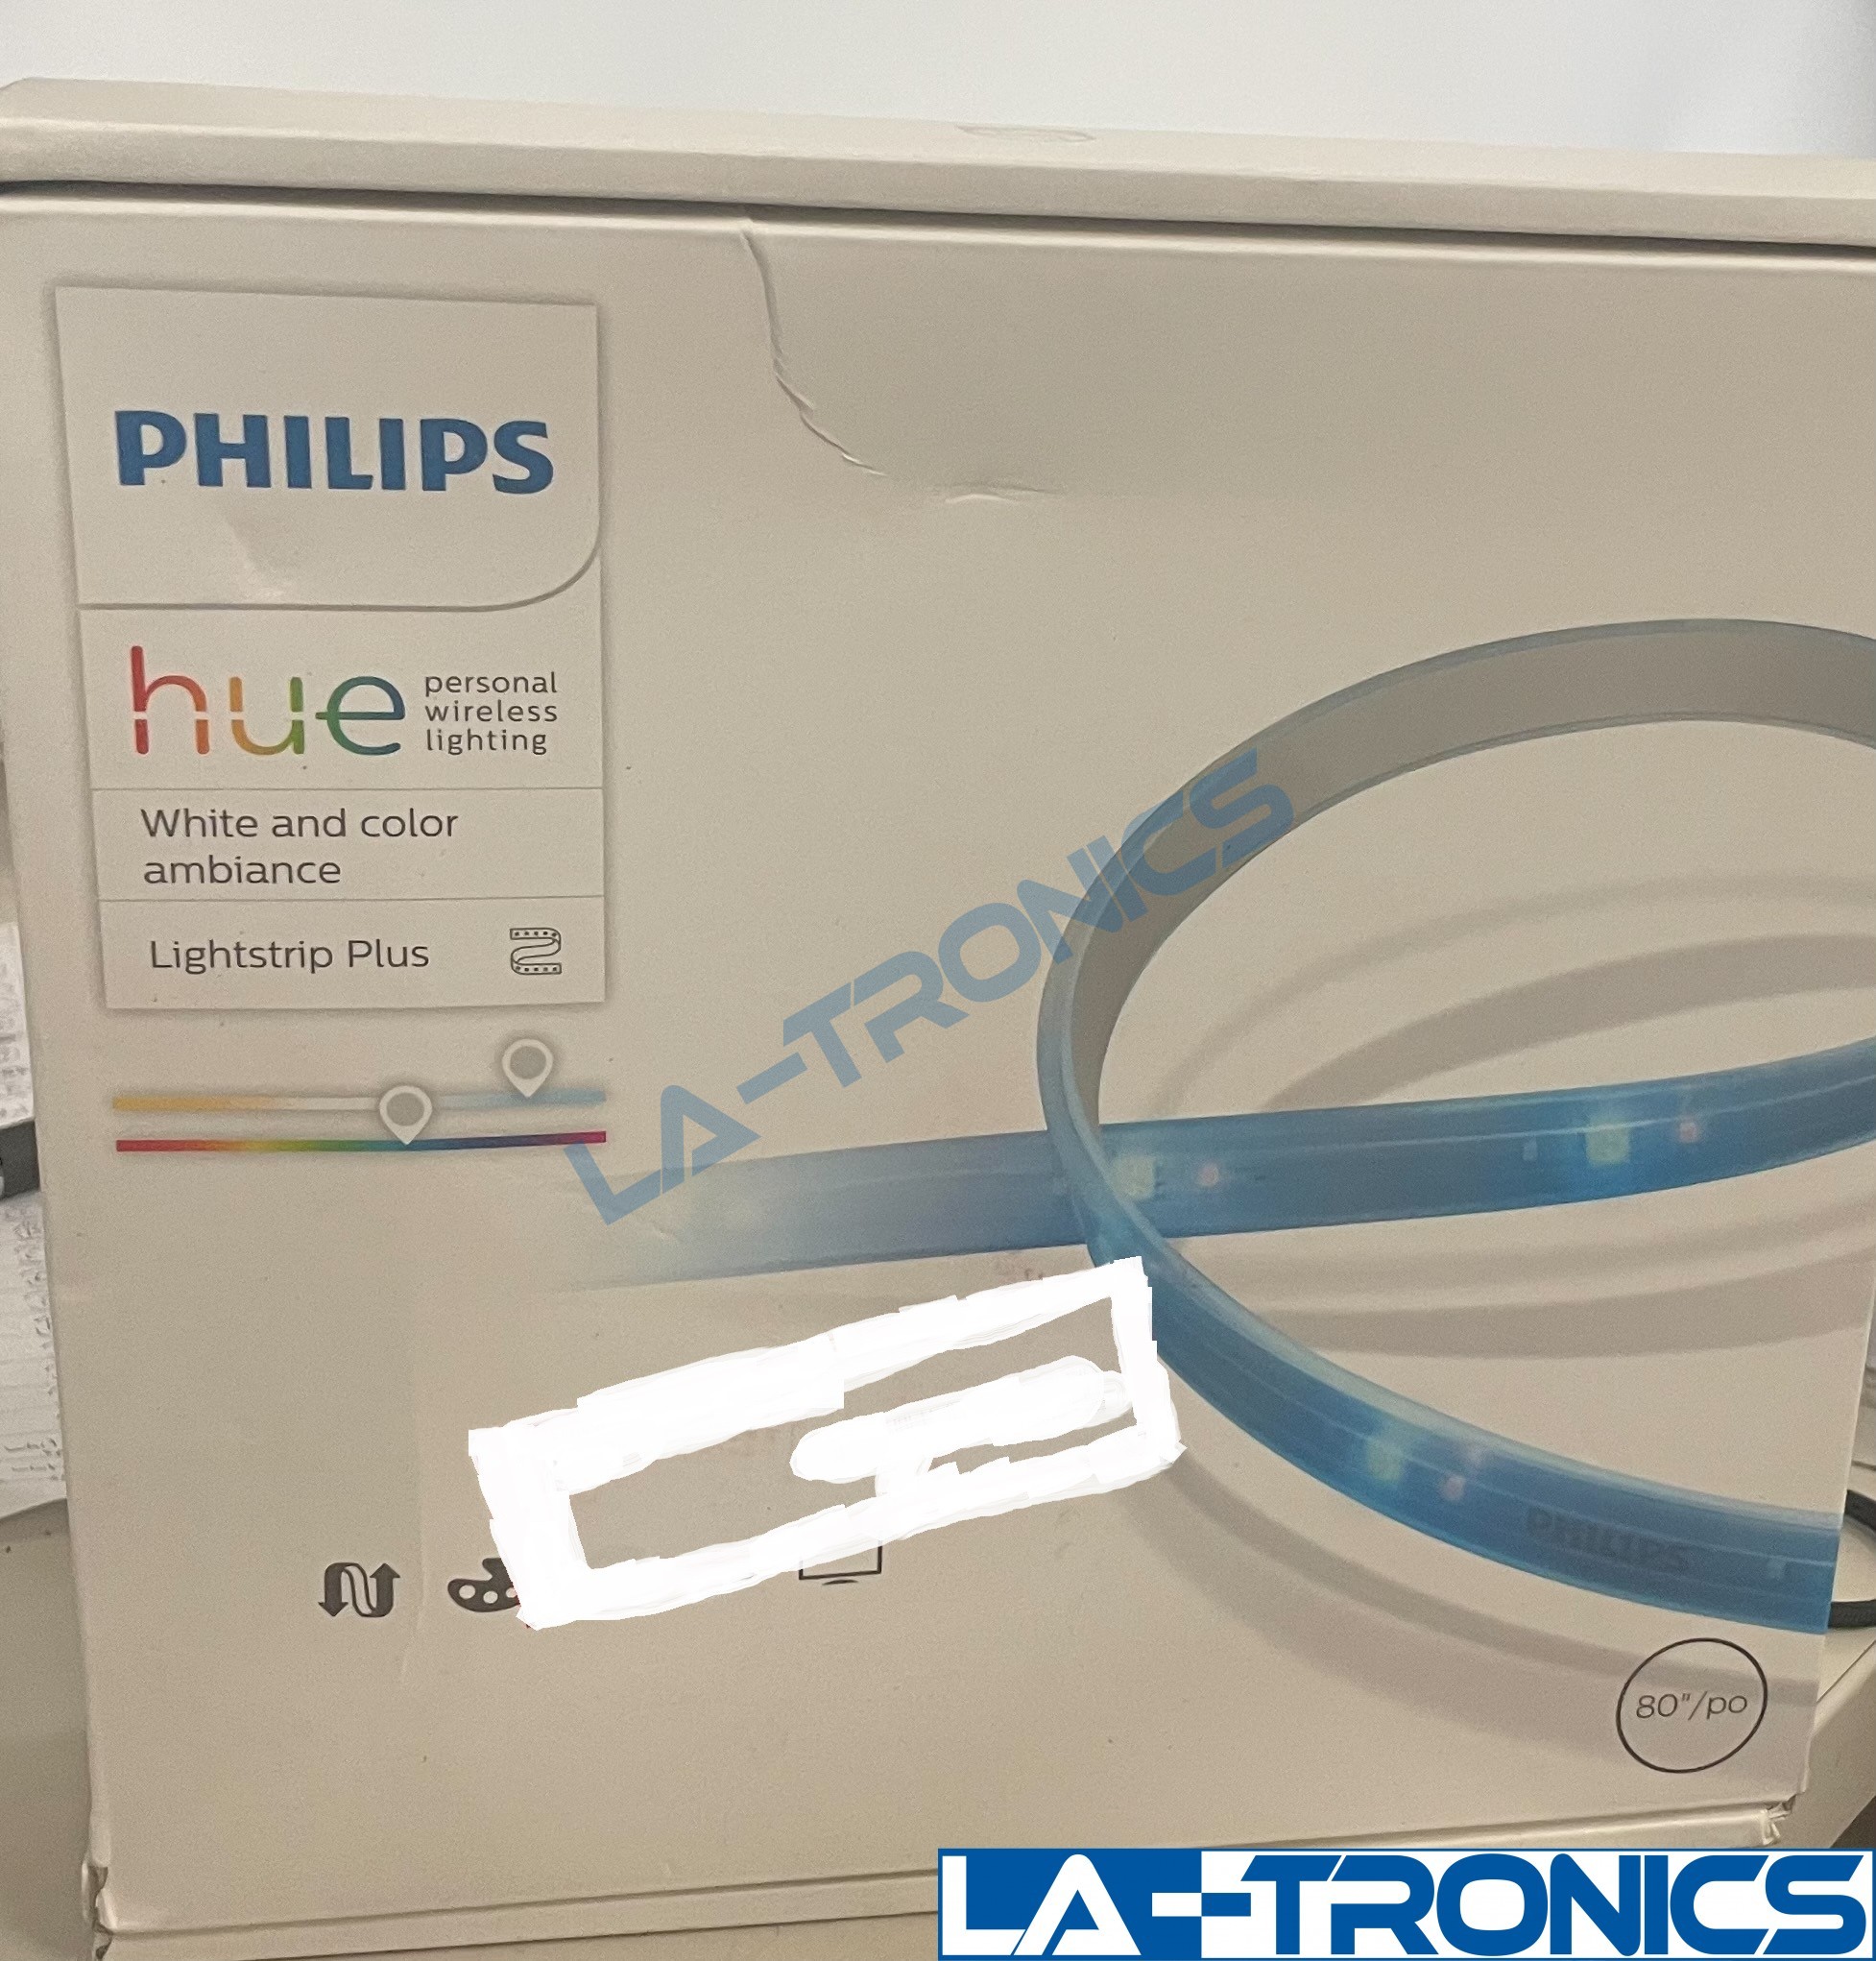 Philips Hue Light Strip Plus White And Color Ambiance 800920